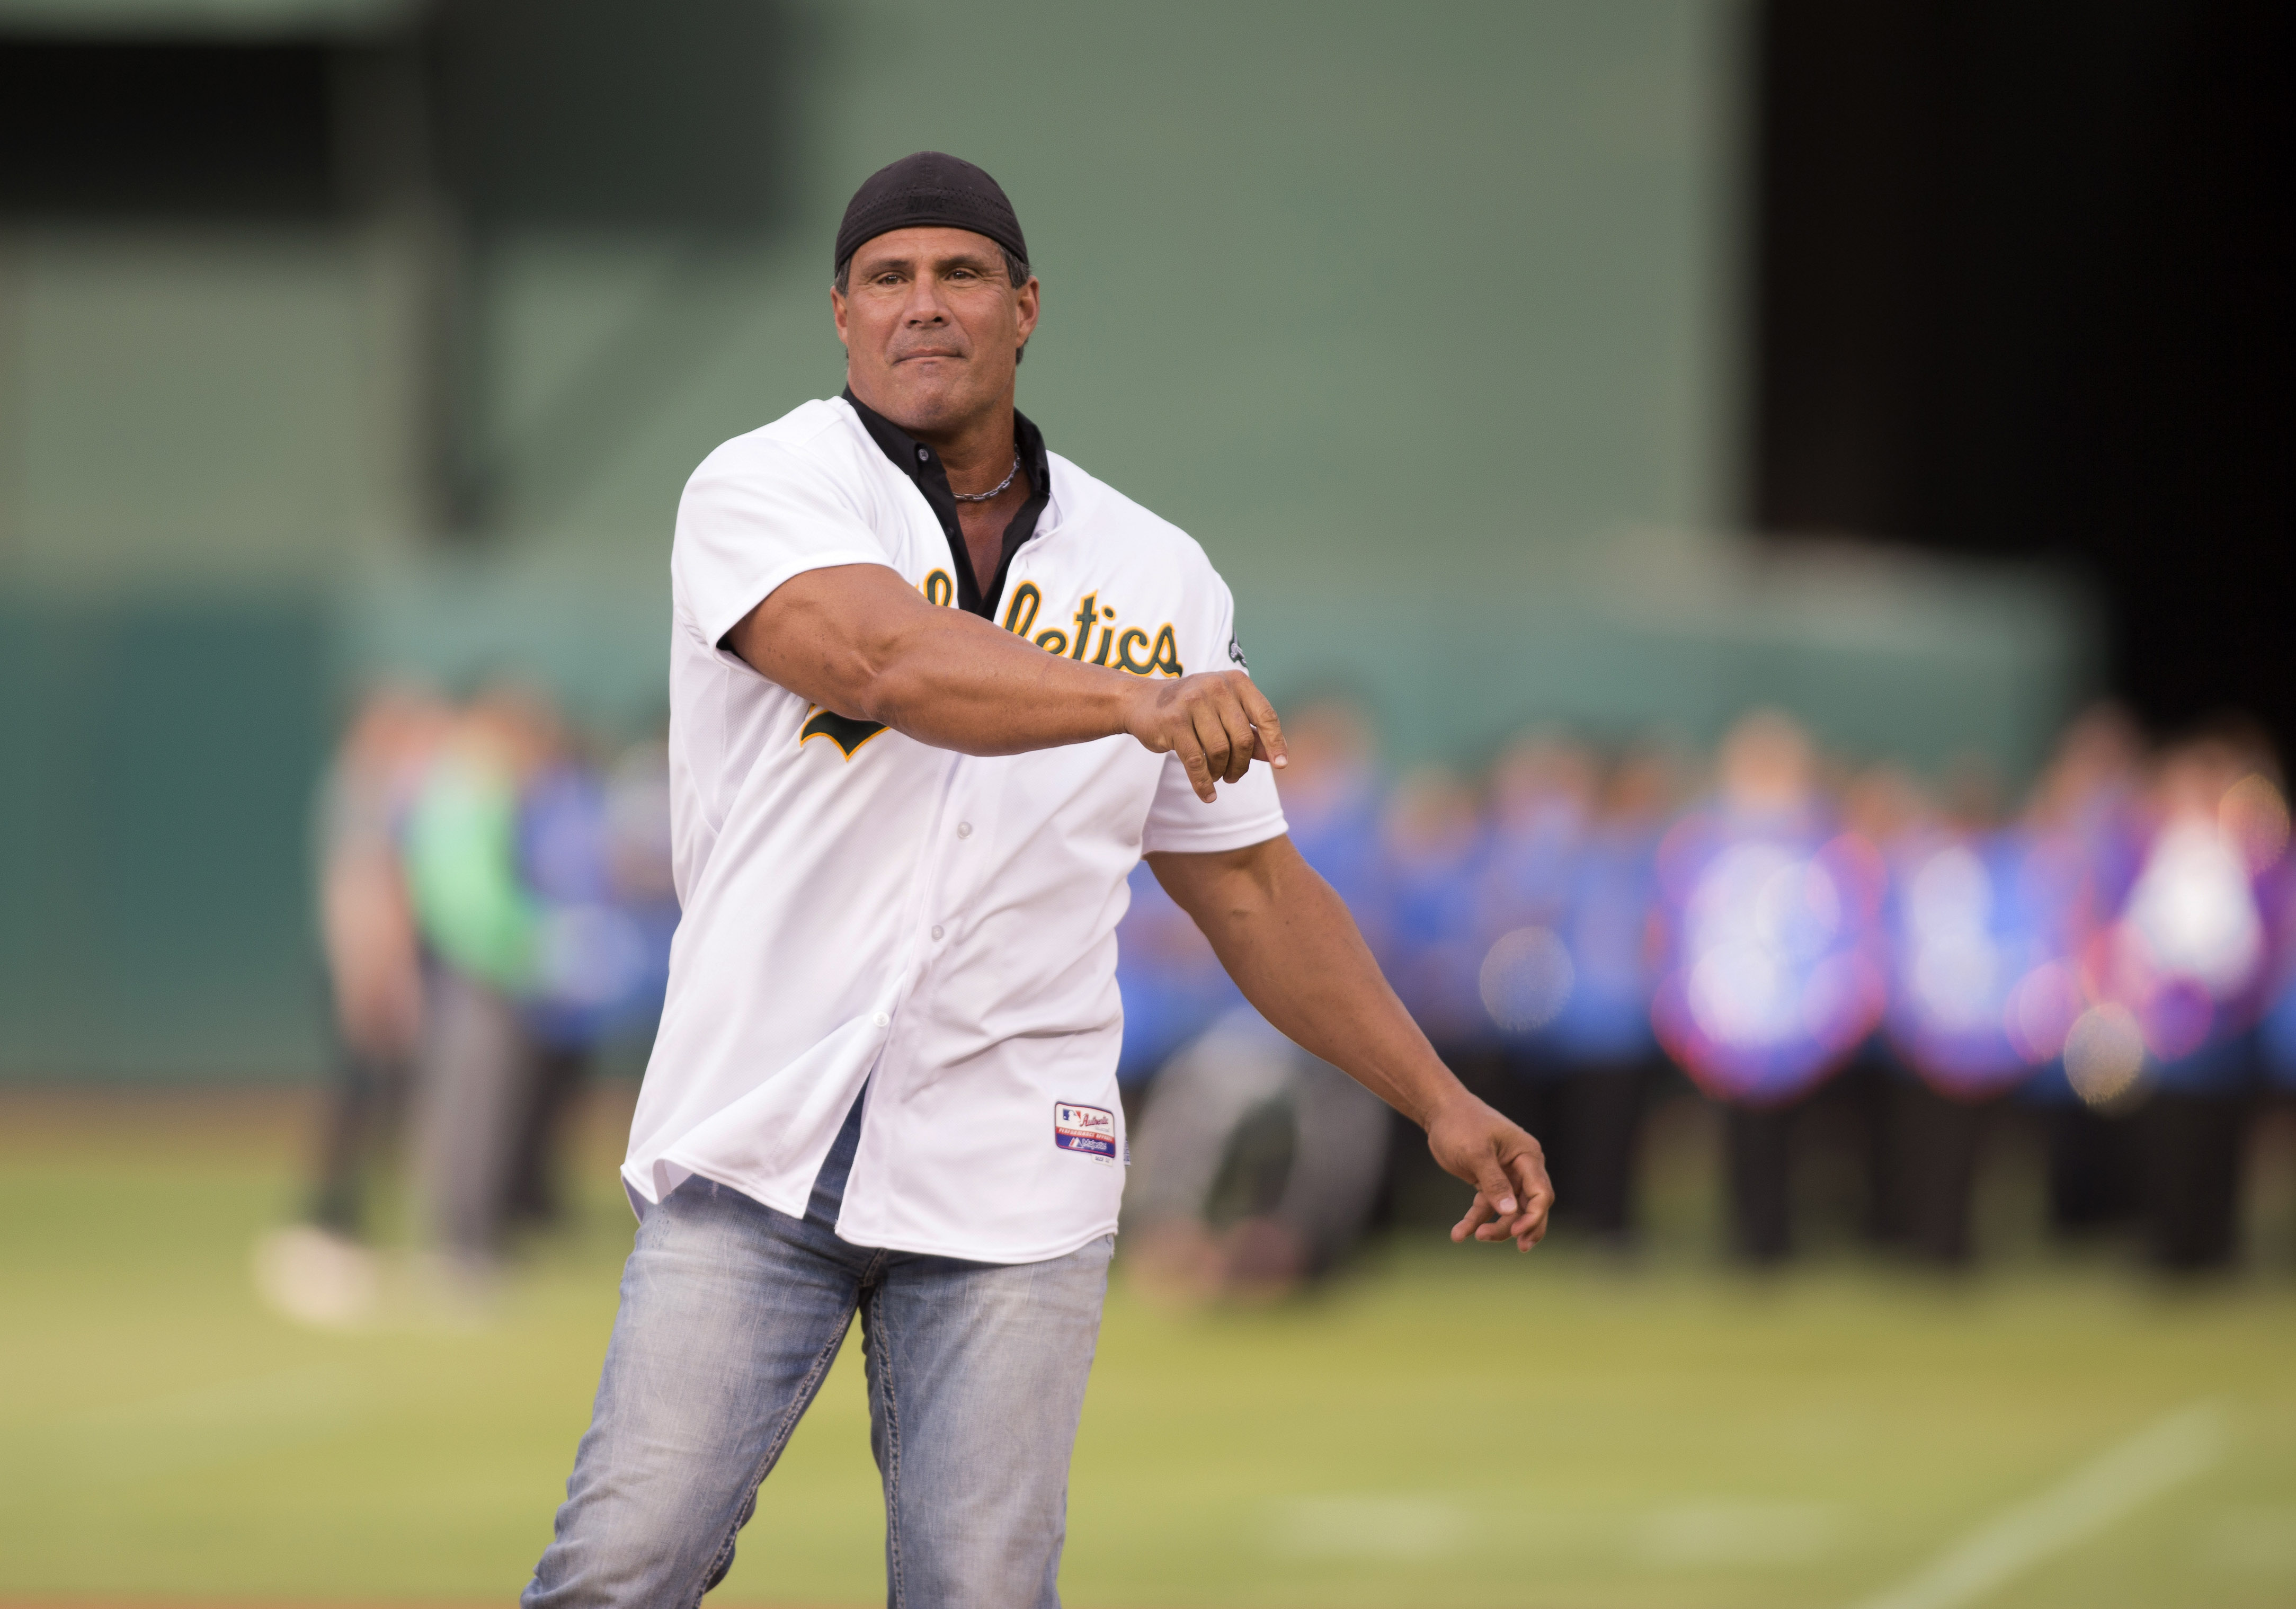 Jose Canseco gets nuts about Jeff Bagwell's induction into the Baseball Hall of Fame 